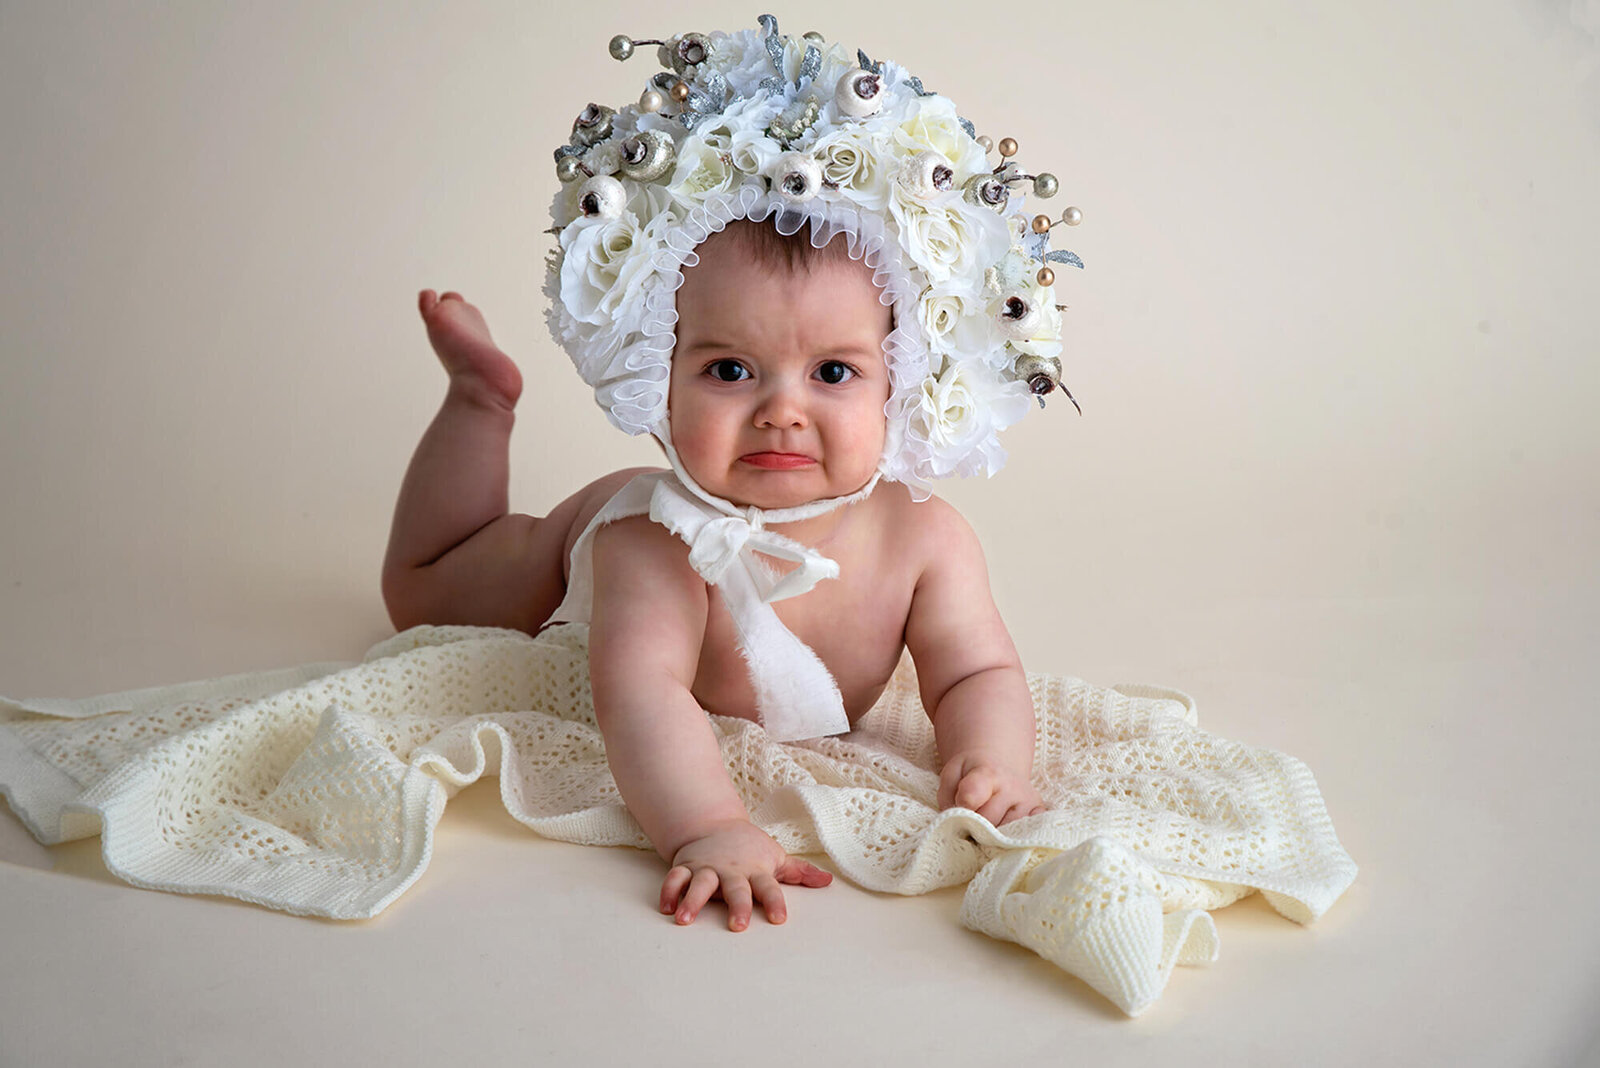 6 month baby with handmade Bonnet